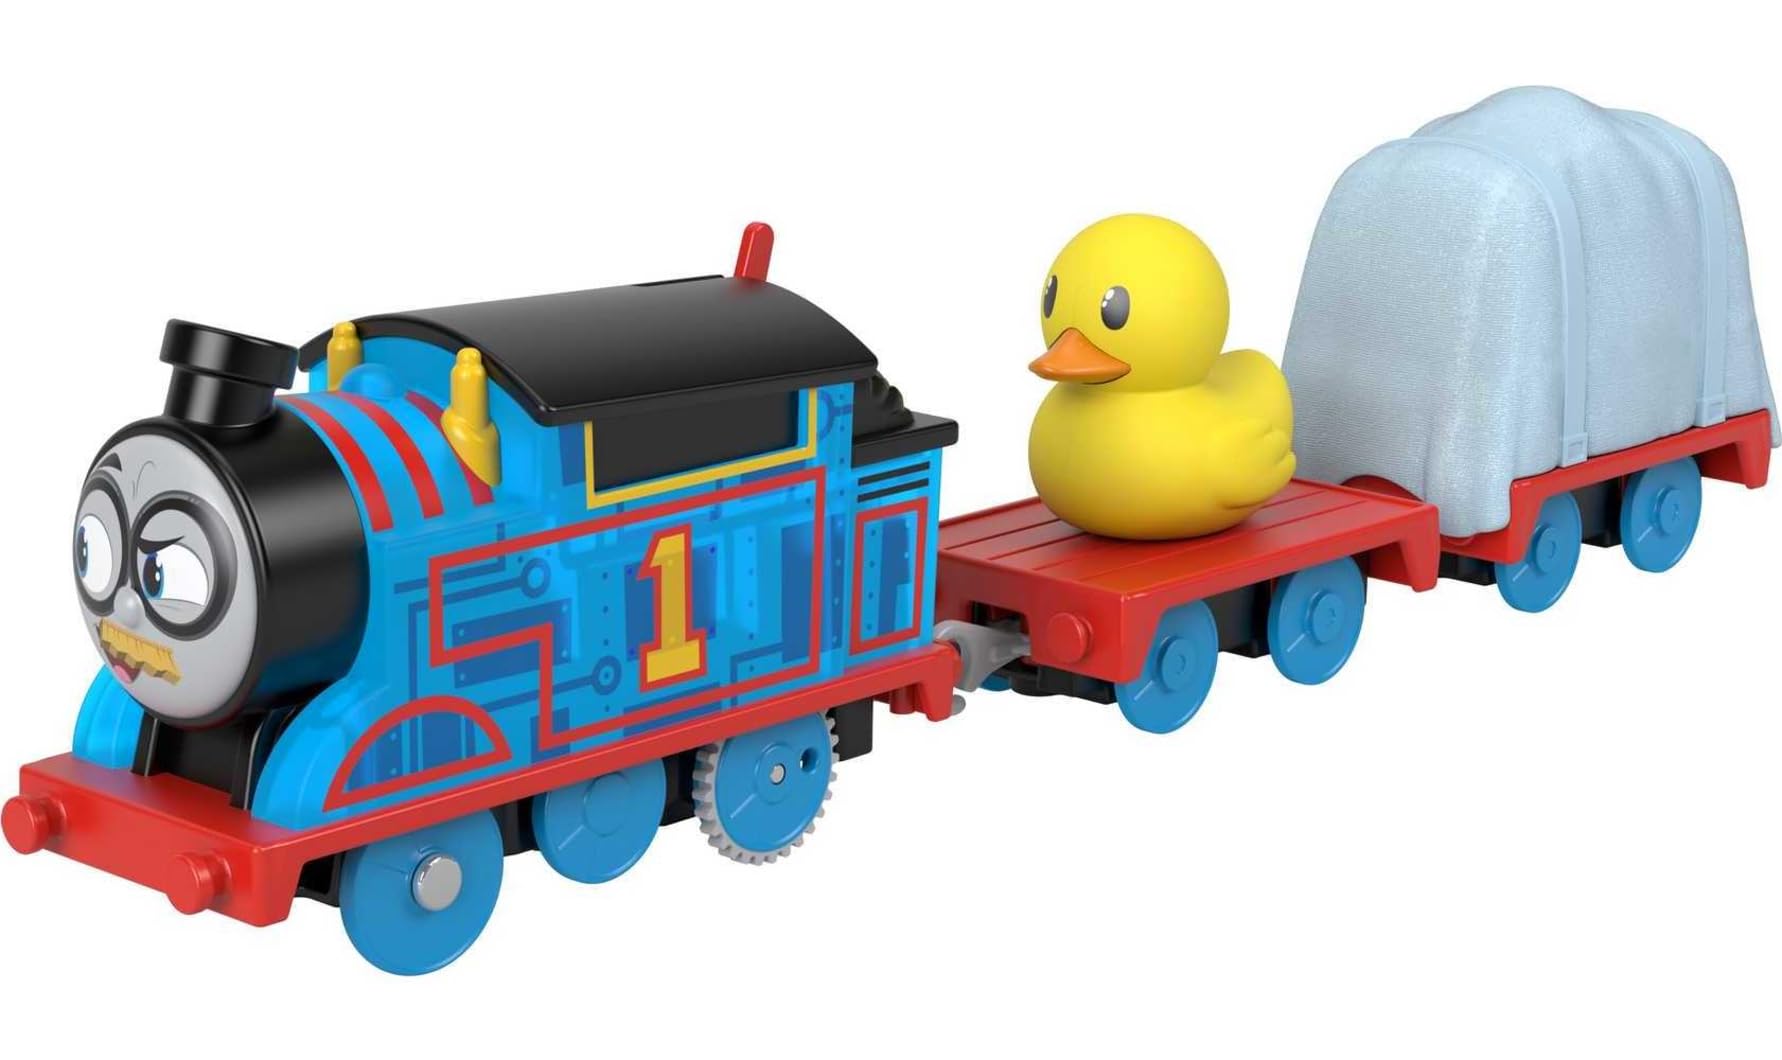 Thomas & Friends Secret Agent Thomas Toy Motorized Engine Train Play Vehicle with Cargo $4.75 + Free Shipping w/ Prime or on $35+